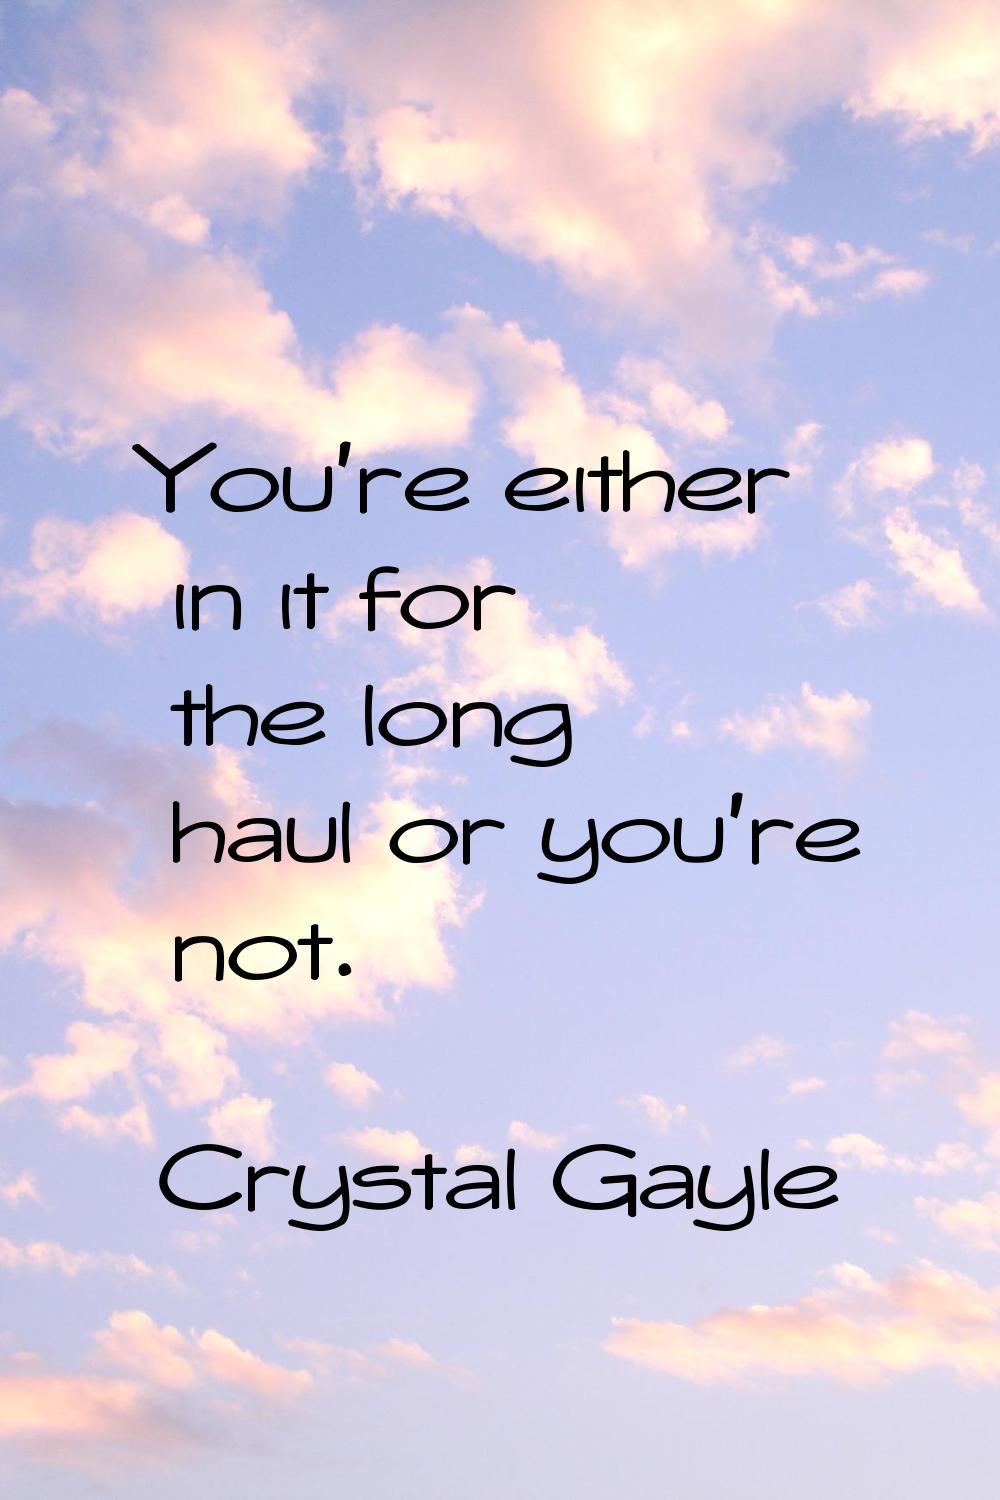 You're either in it for the long haul or you're not.